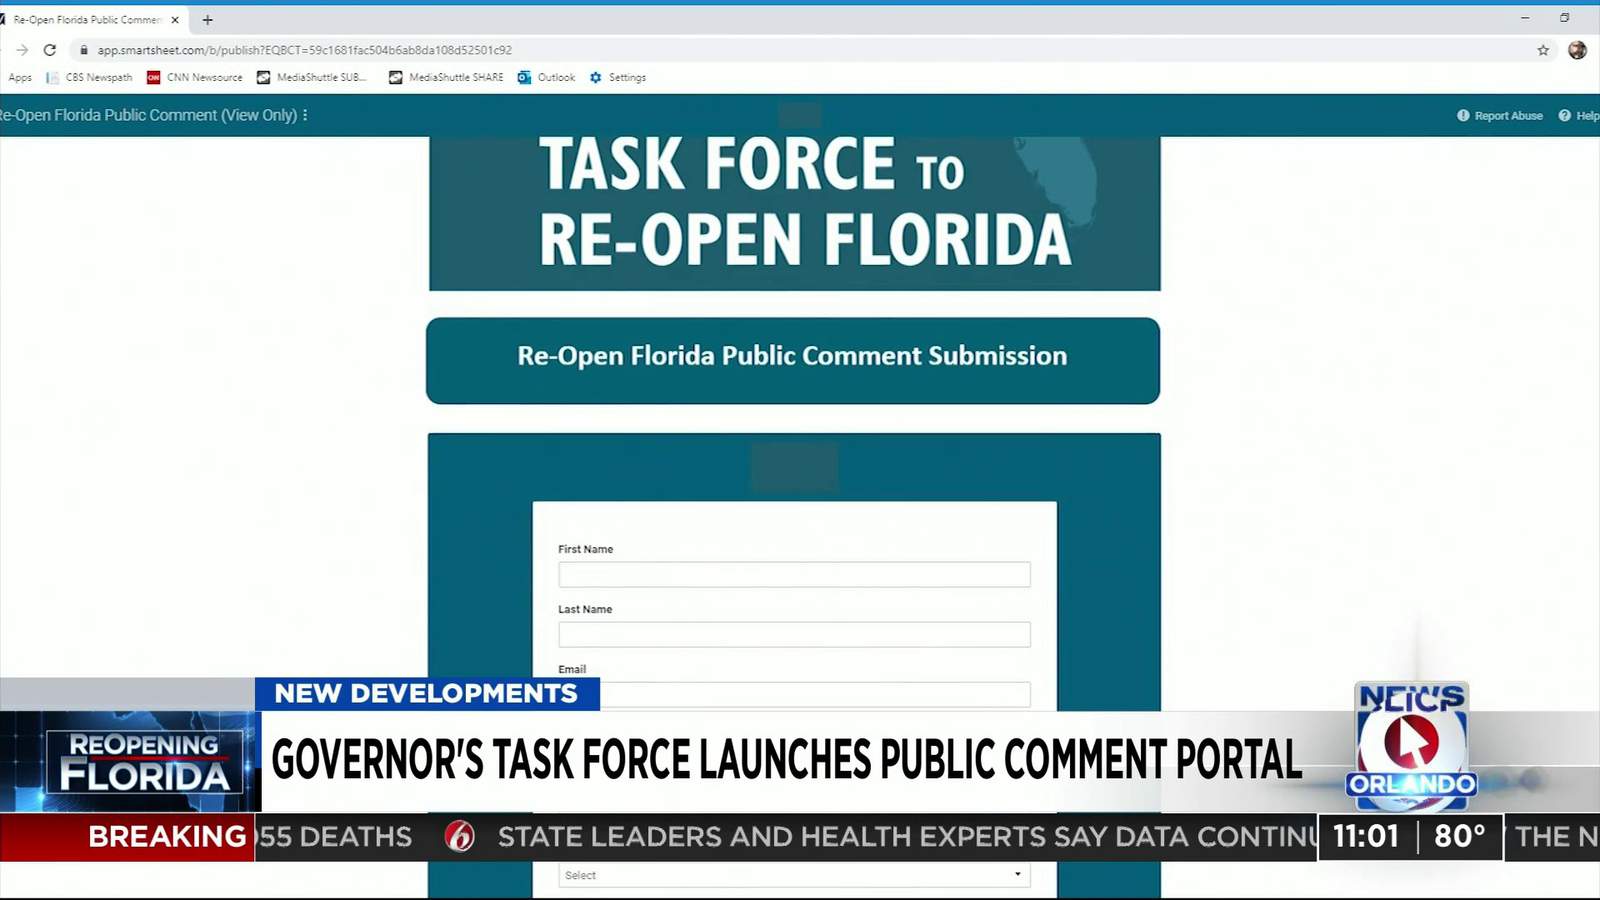 Governor's task force launches public comment portal